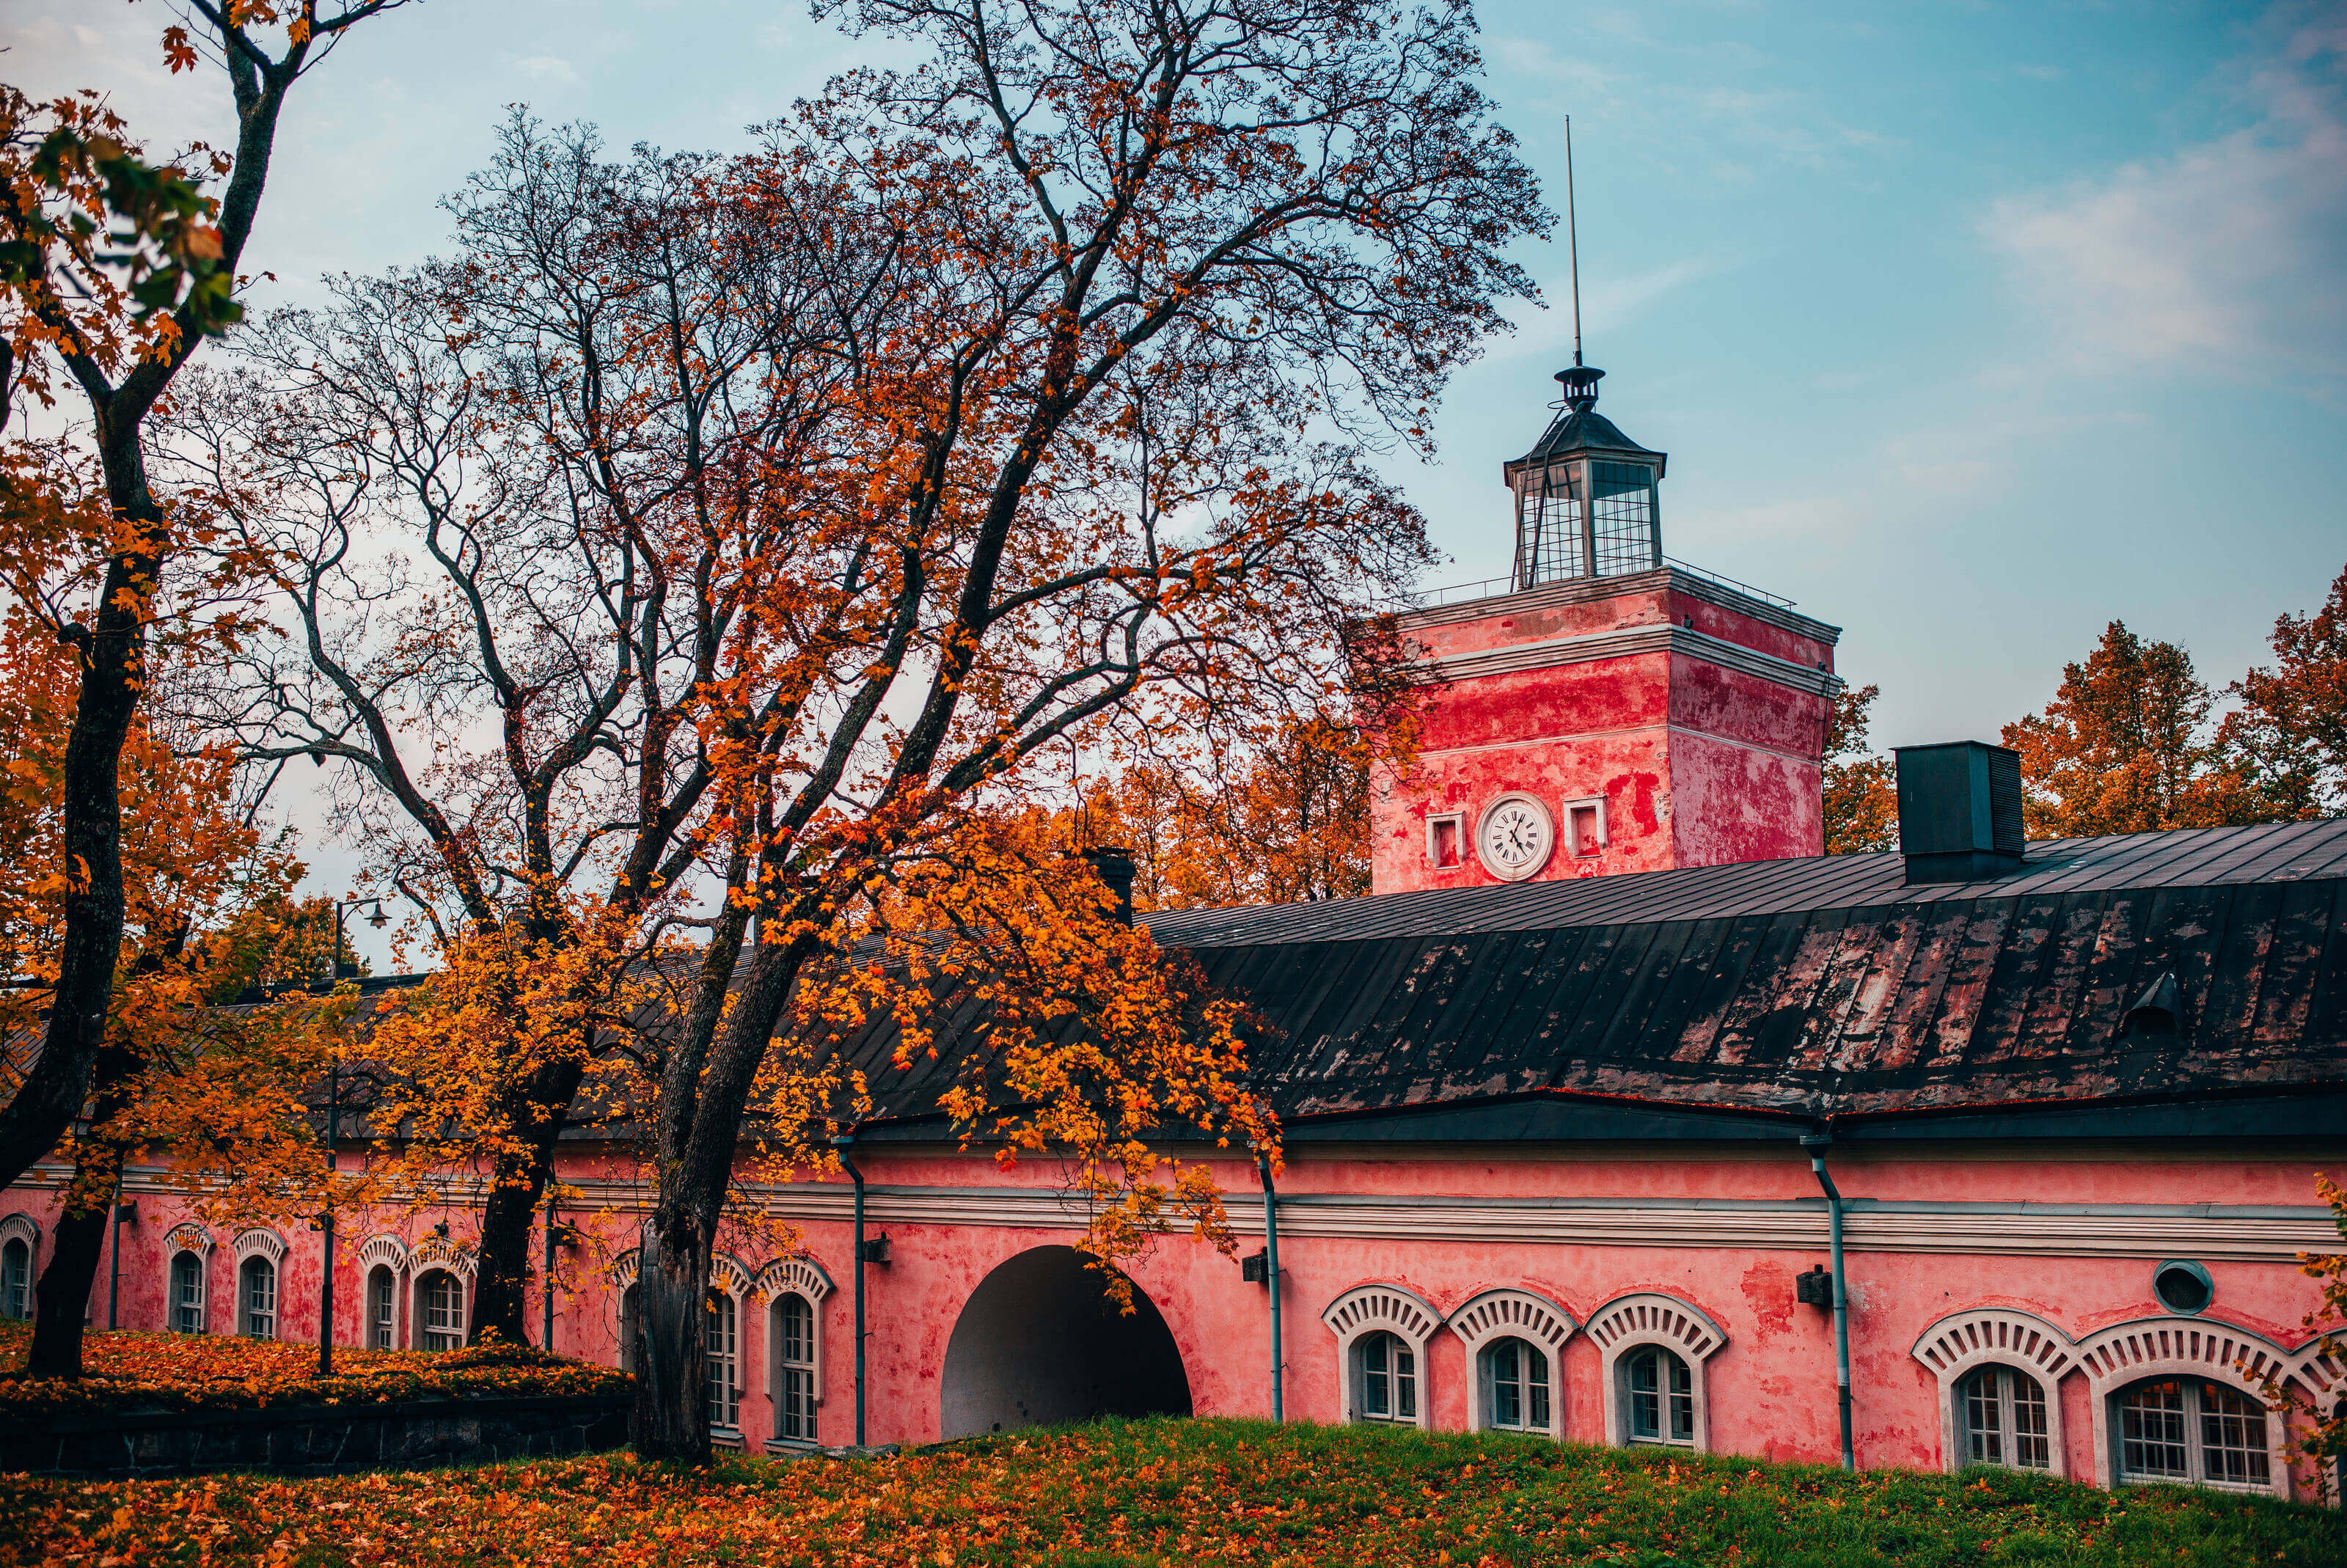 A pink coloured wall in the Suomenlinna fortress in Helsinki, Finland